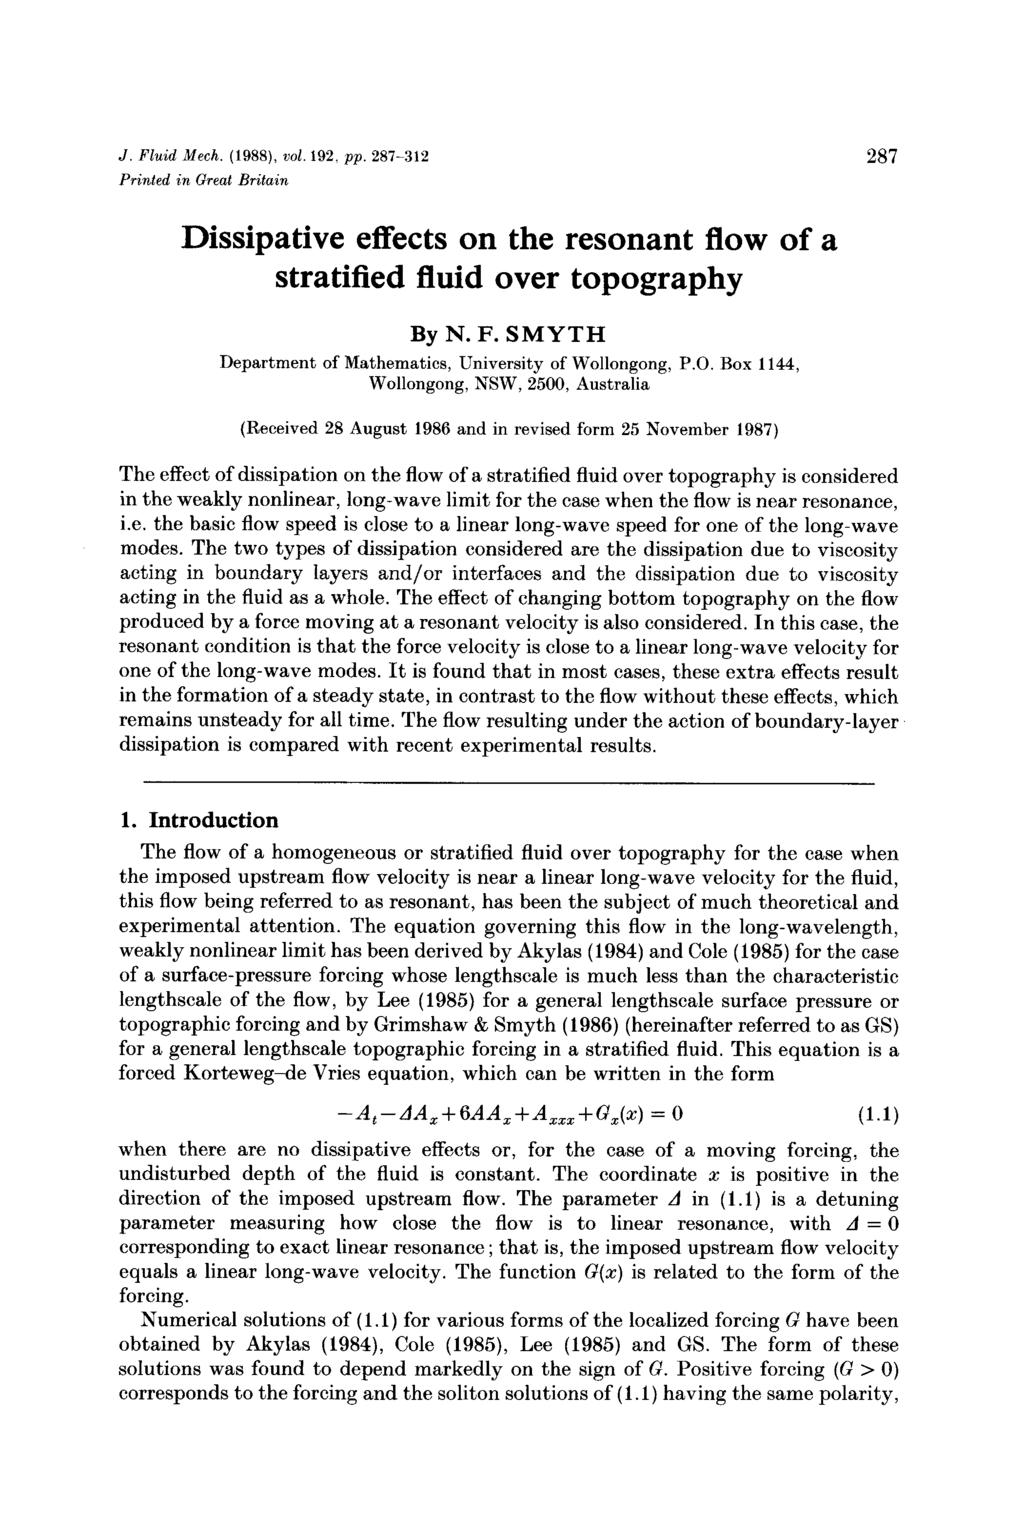 J. Fluid Mech. (1988), vol. 192, pp. 287-312 Printed in Great Britain 287 Dissipative effects on the resonant flow of a stratified fluid over topography By N. F. SMYTH Department of Mathematics, University of Wollongong, P.